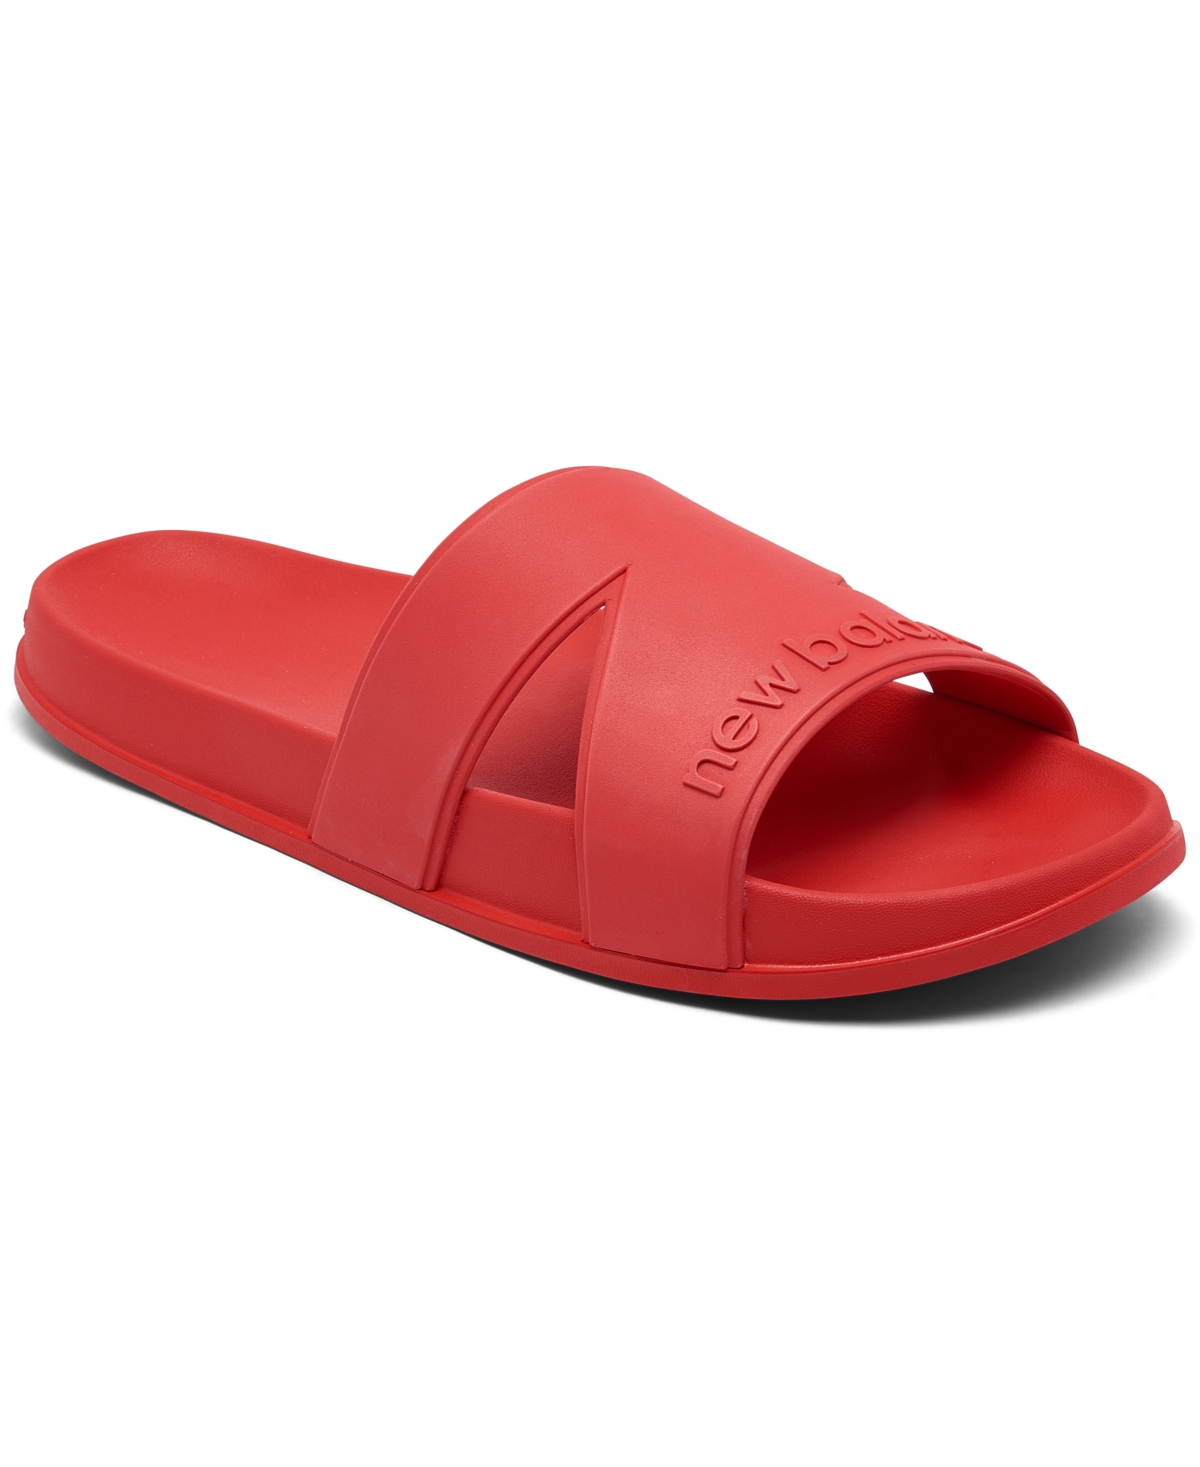 Shop New Balance Men's 200 Slide Sandals From Finish Line In True Red